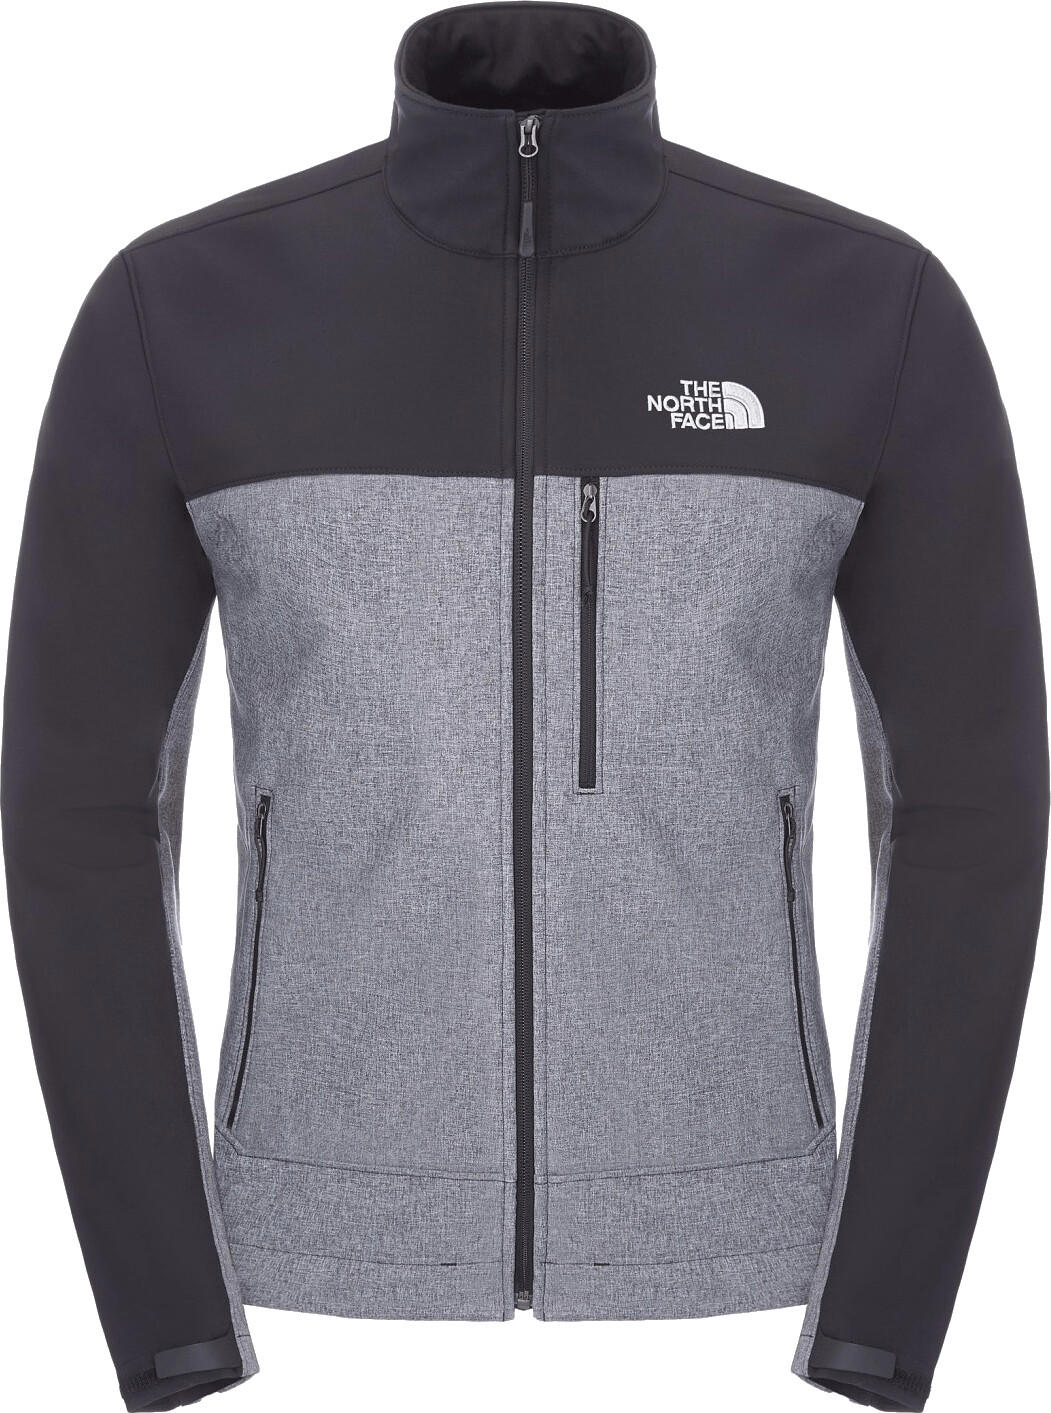 The North Face Apex Bionic Jacket (CMJ2)